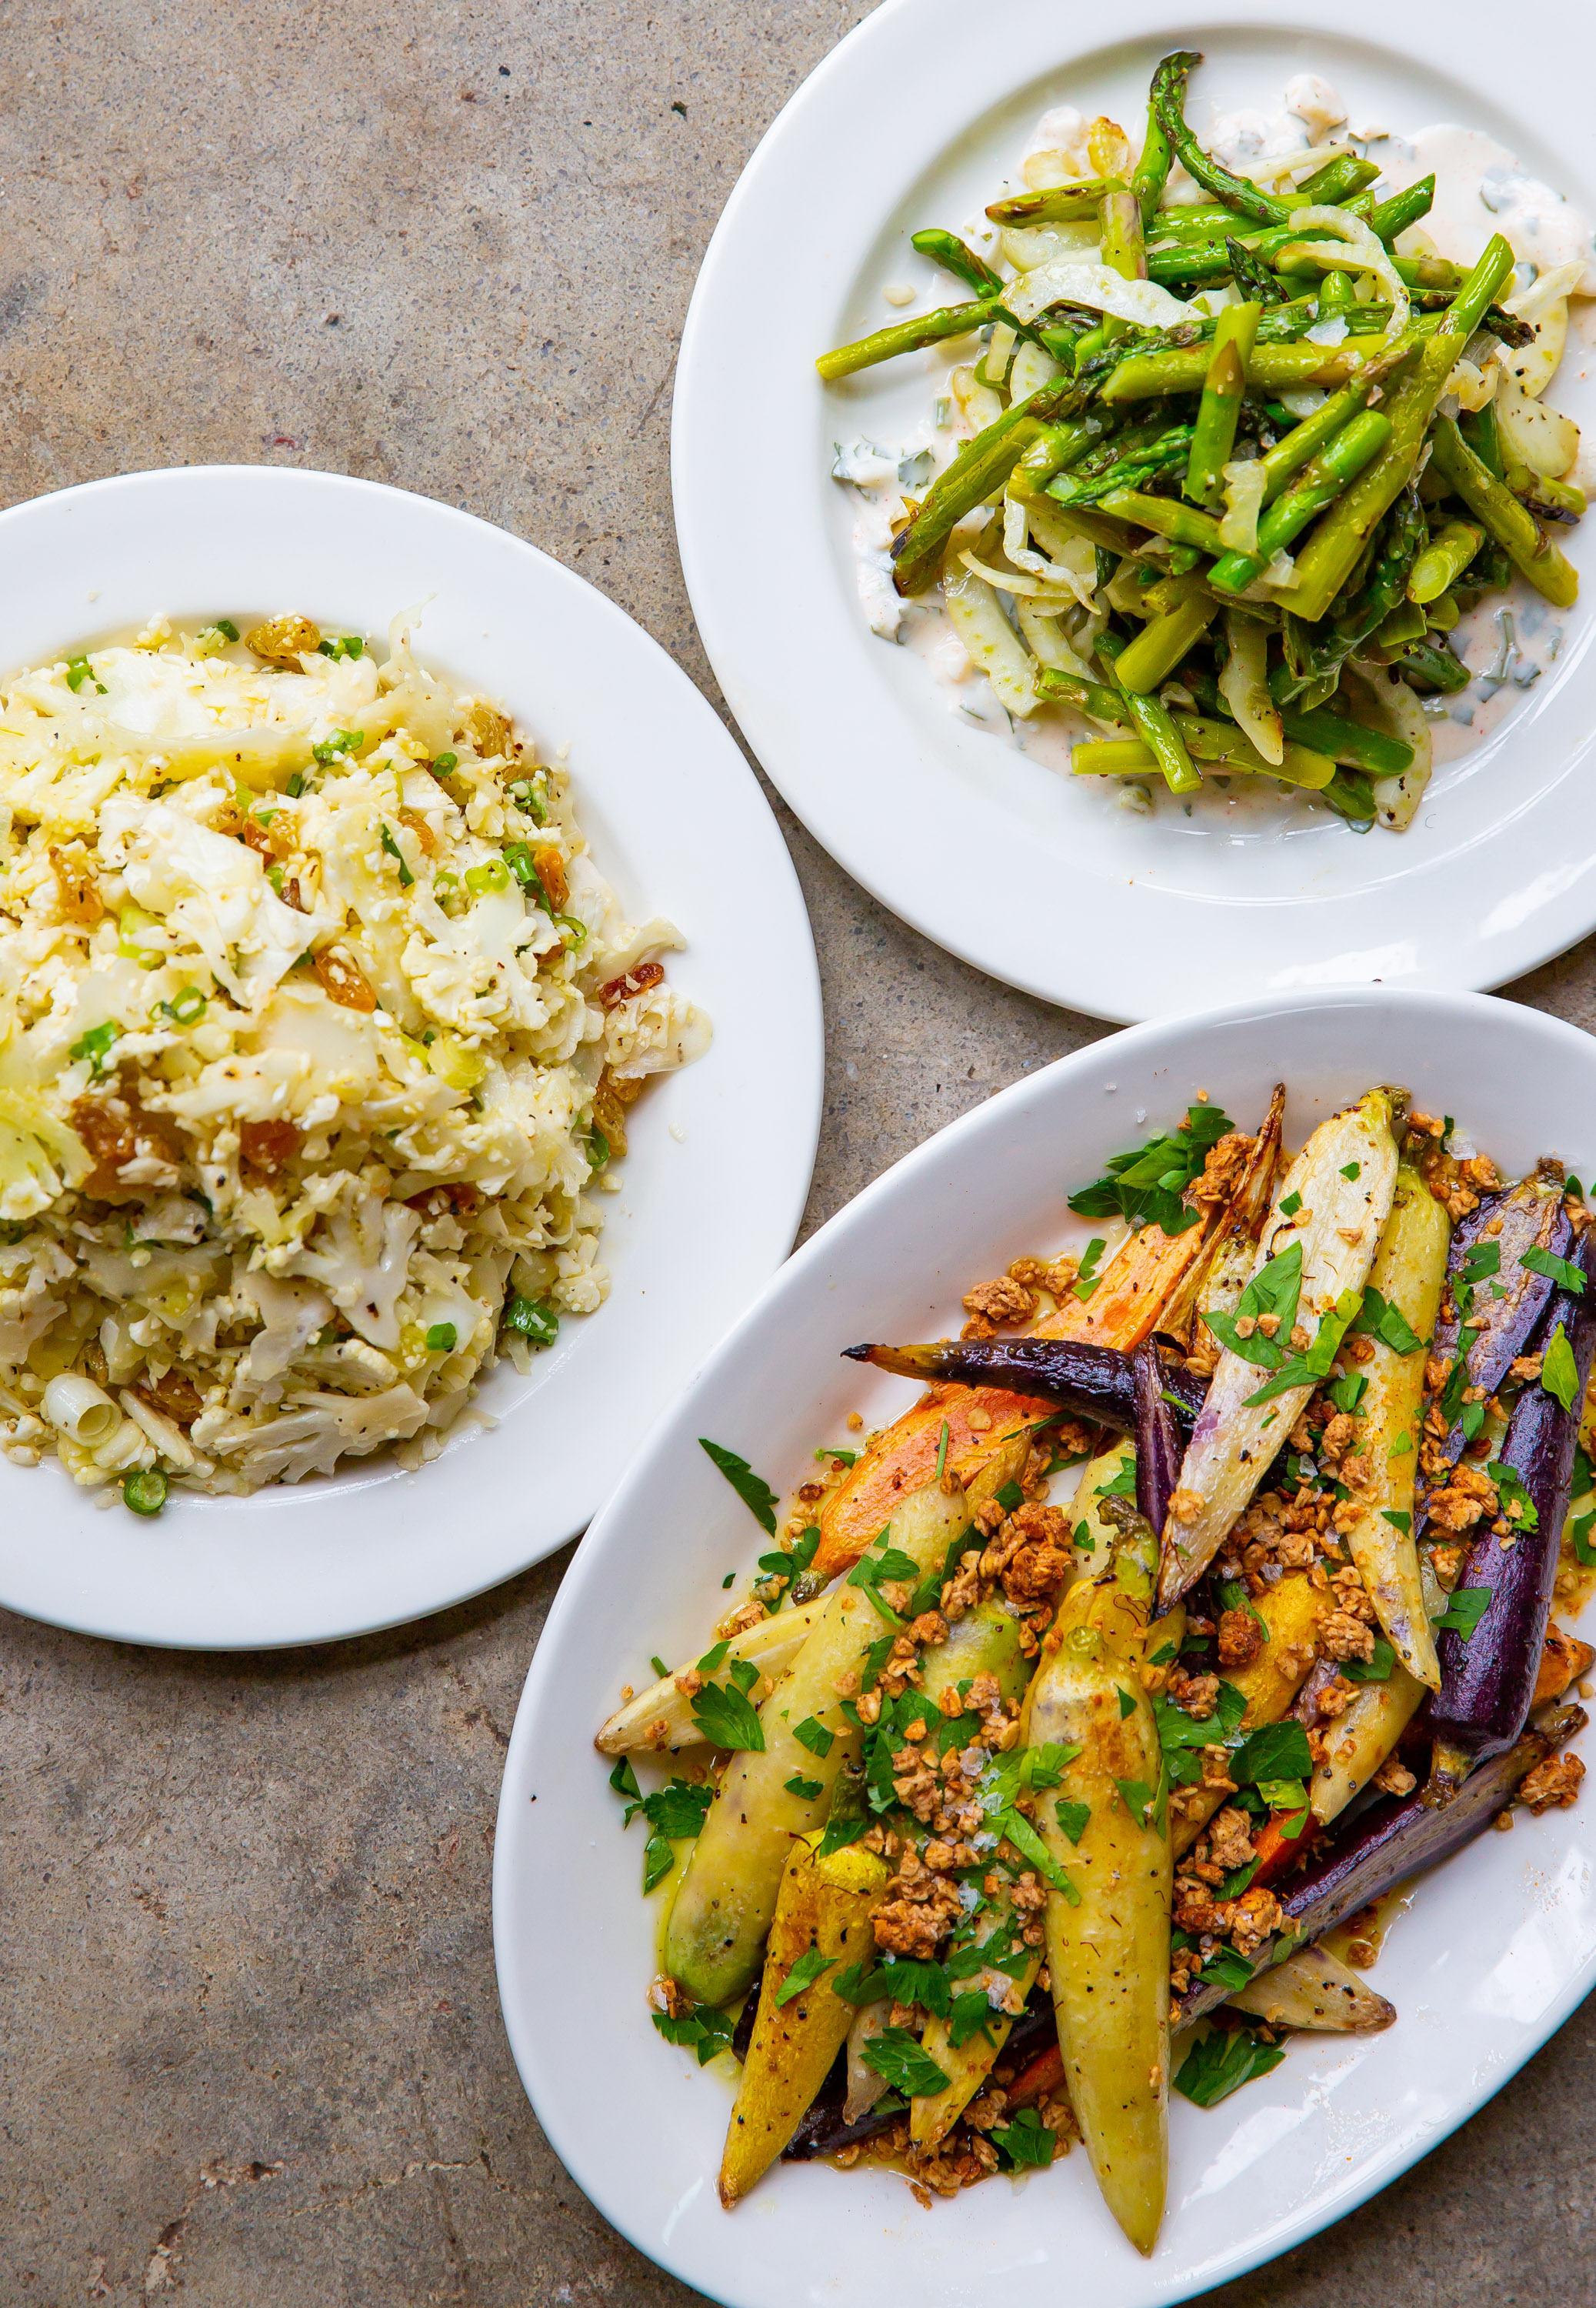 Among Adele's vegetable dishes are (clockwise from left) cauliflower salad, fried asparagus with lemon yoghurt dressing, and charred heirloom carrots with spicy granola.  Ryan Fleisher for The Atlanta Journal-Constitution